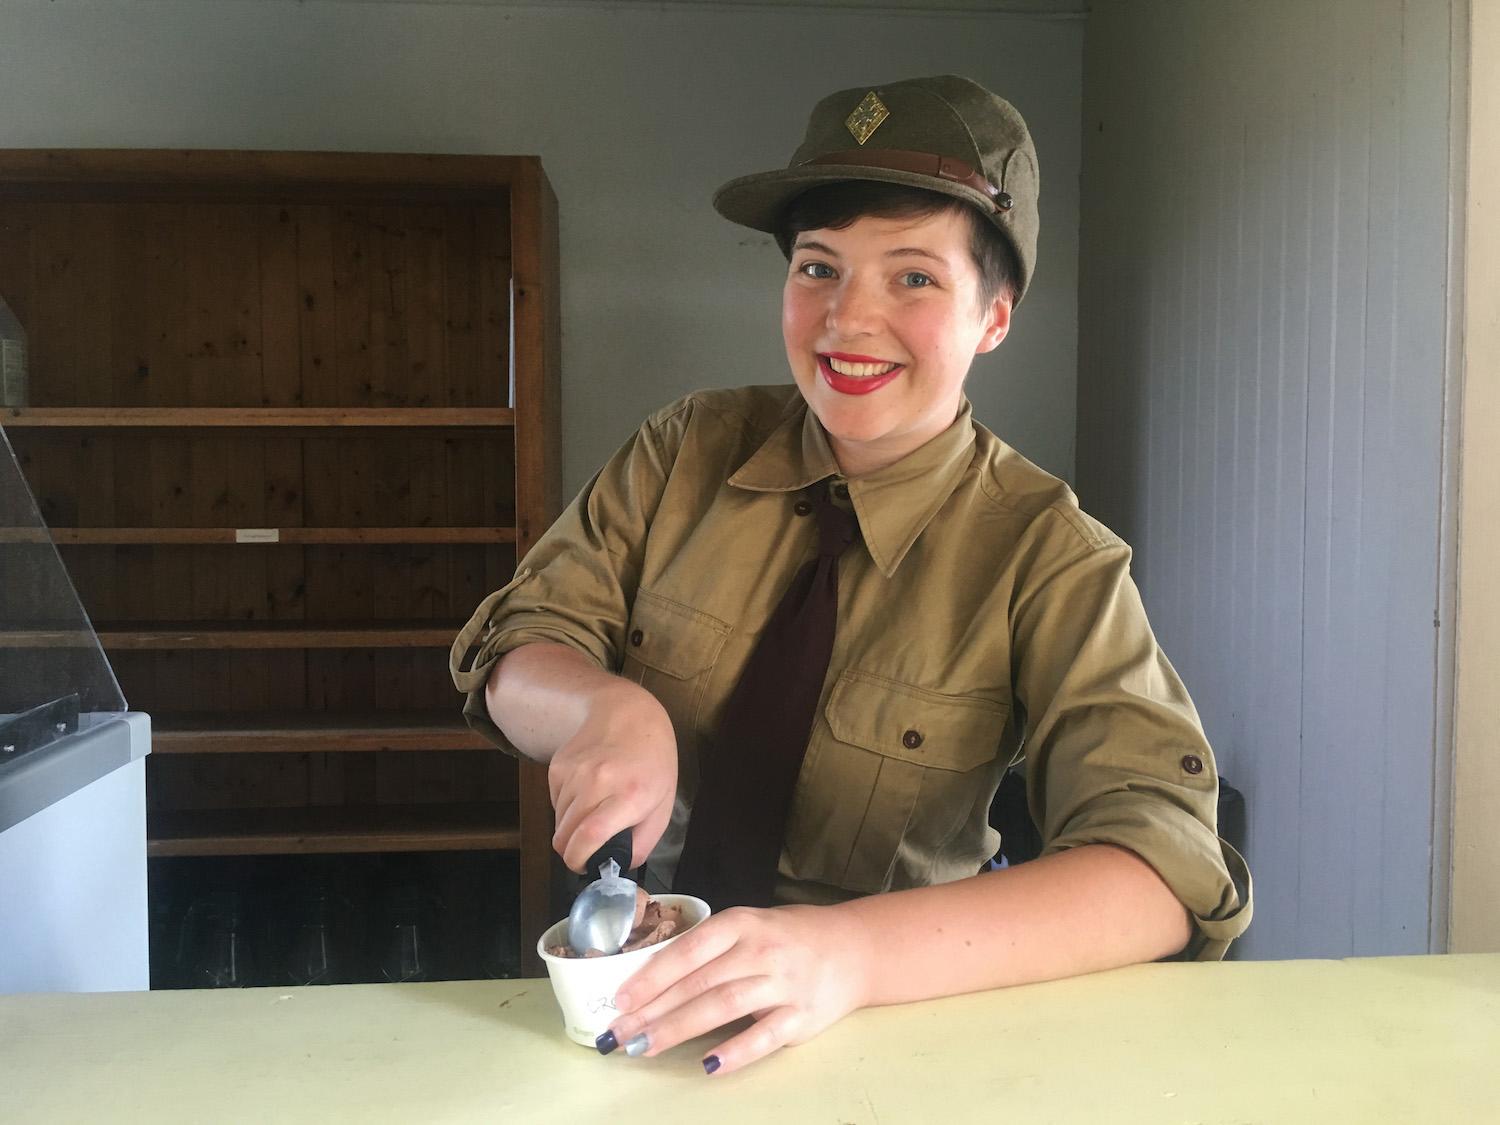 Every summer, Parks Canada staff serve signature ice cream flavors from the historic canteen.